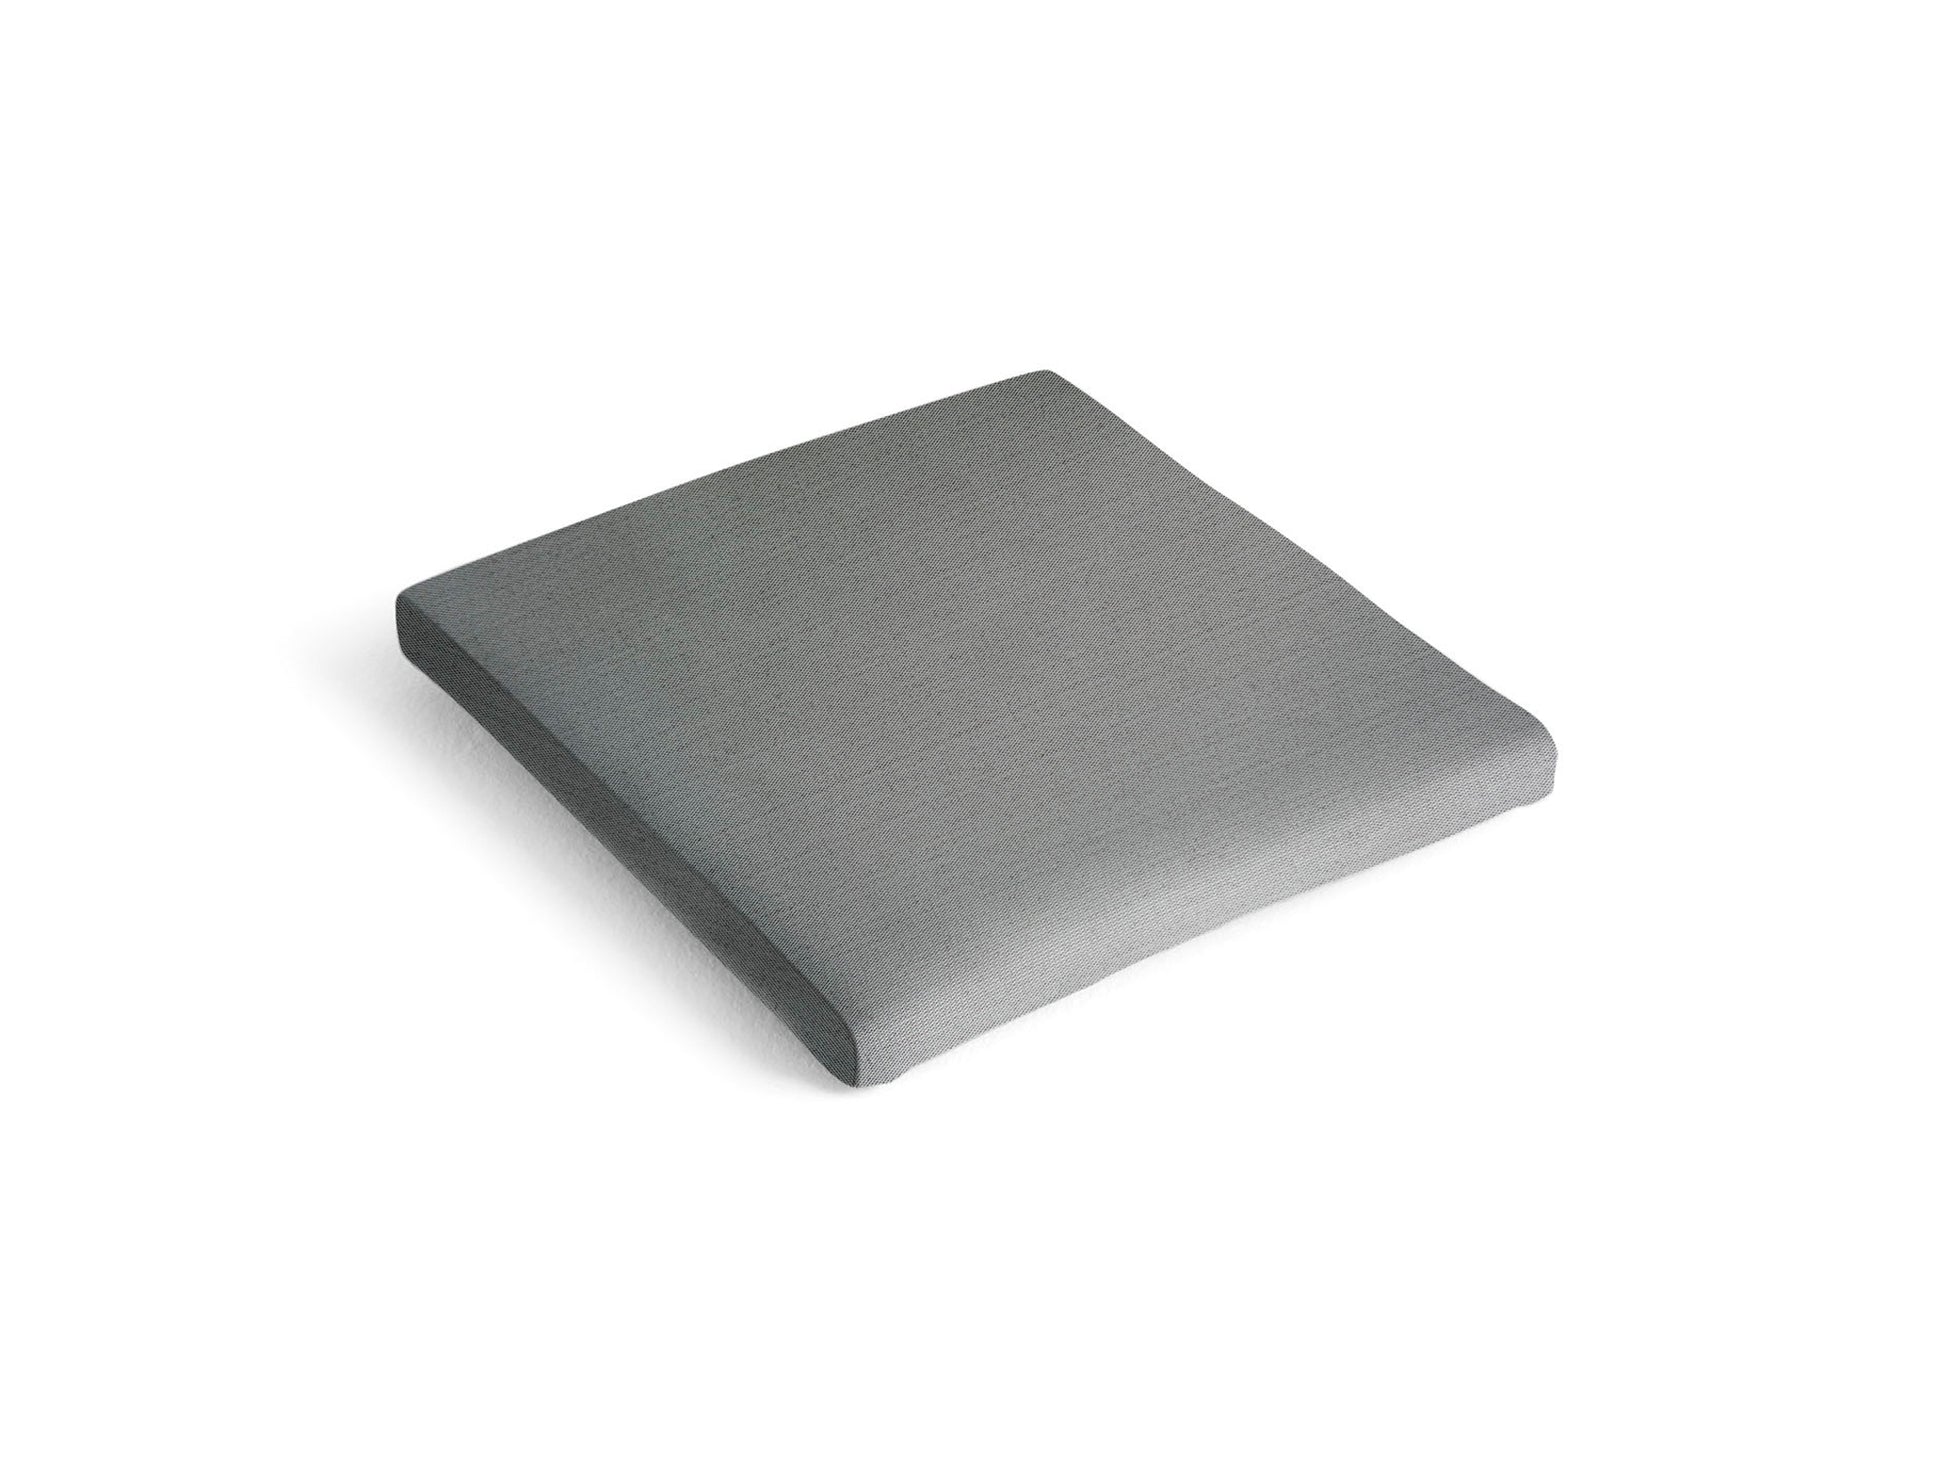 Type Chair Seat Cushion by HAY - Silver